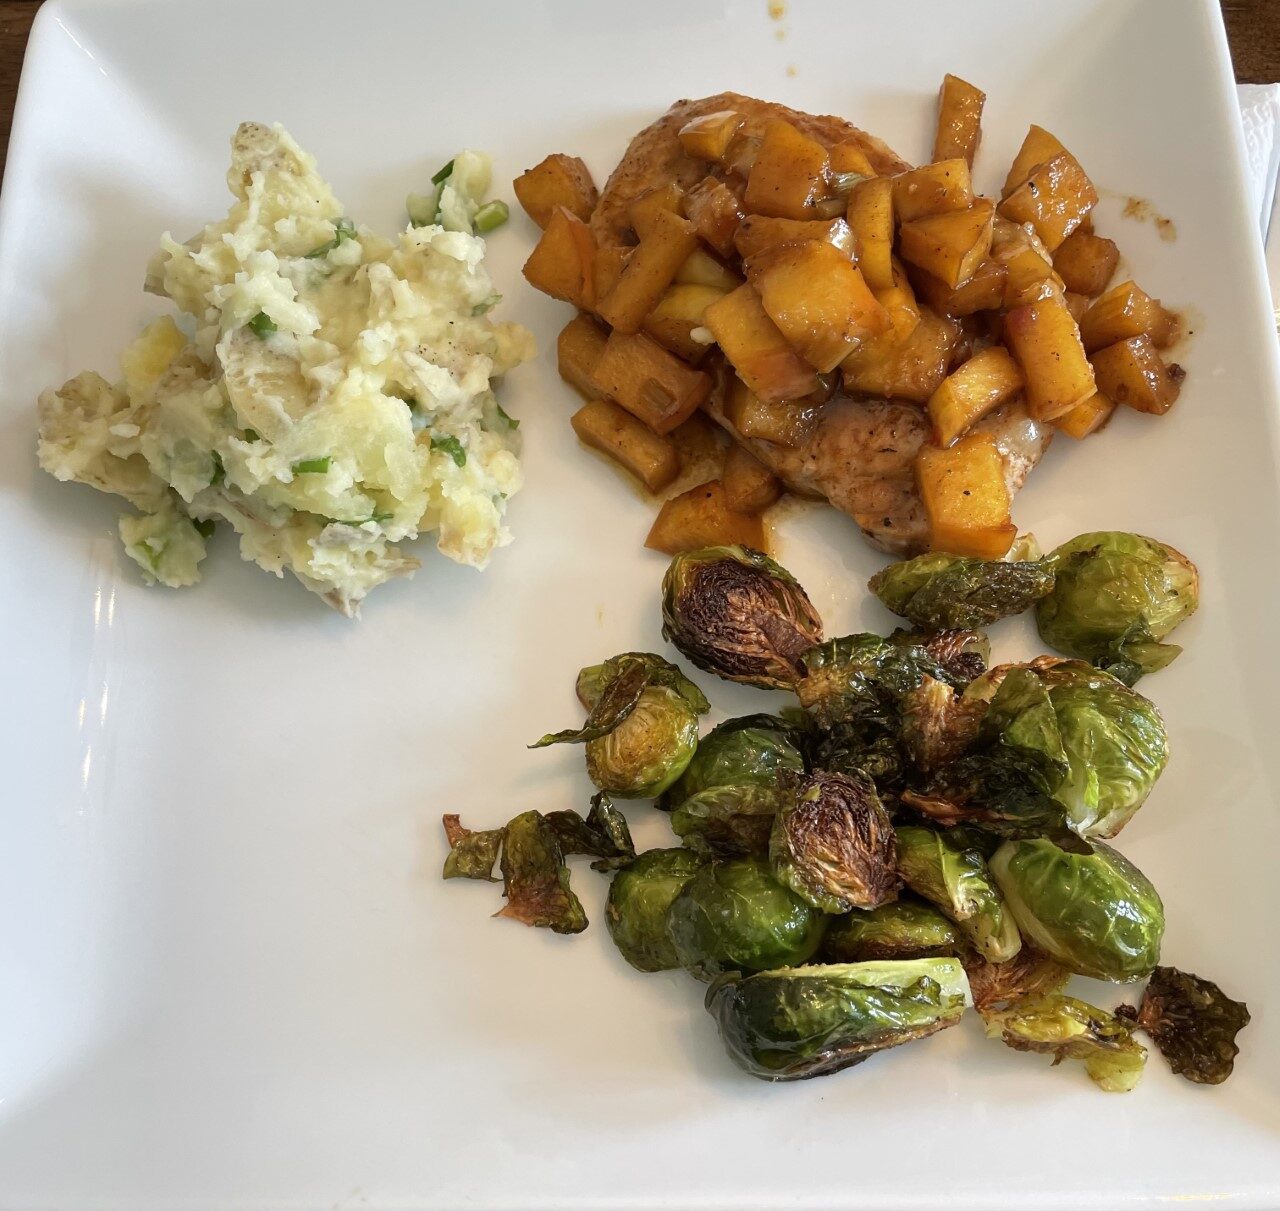 Brown Sugar Bourbon Pork Chops with Apple Pan Sauce, Scallion Mashed Potatoes and Brussel Sprouts